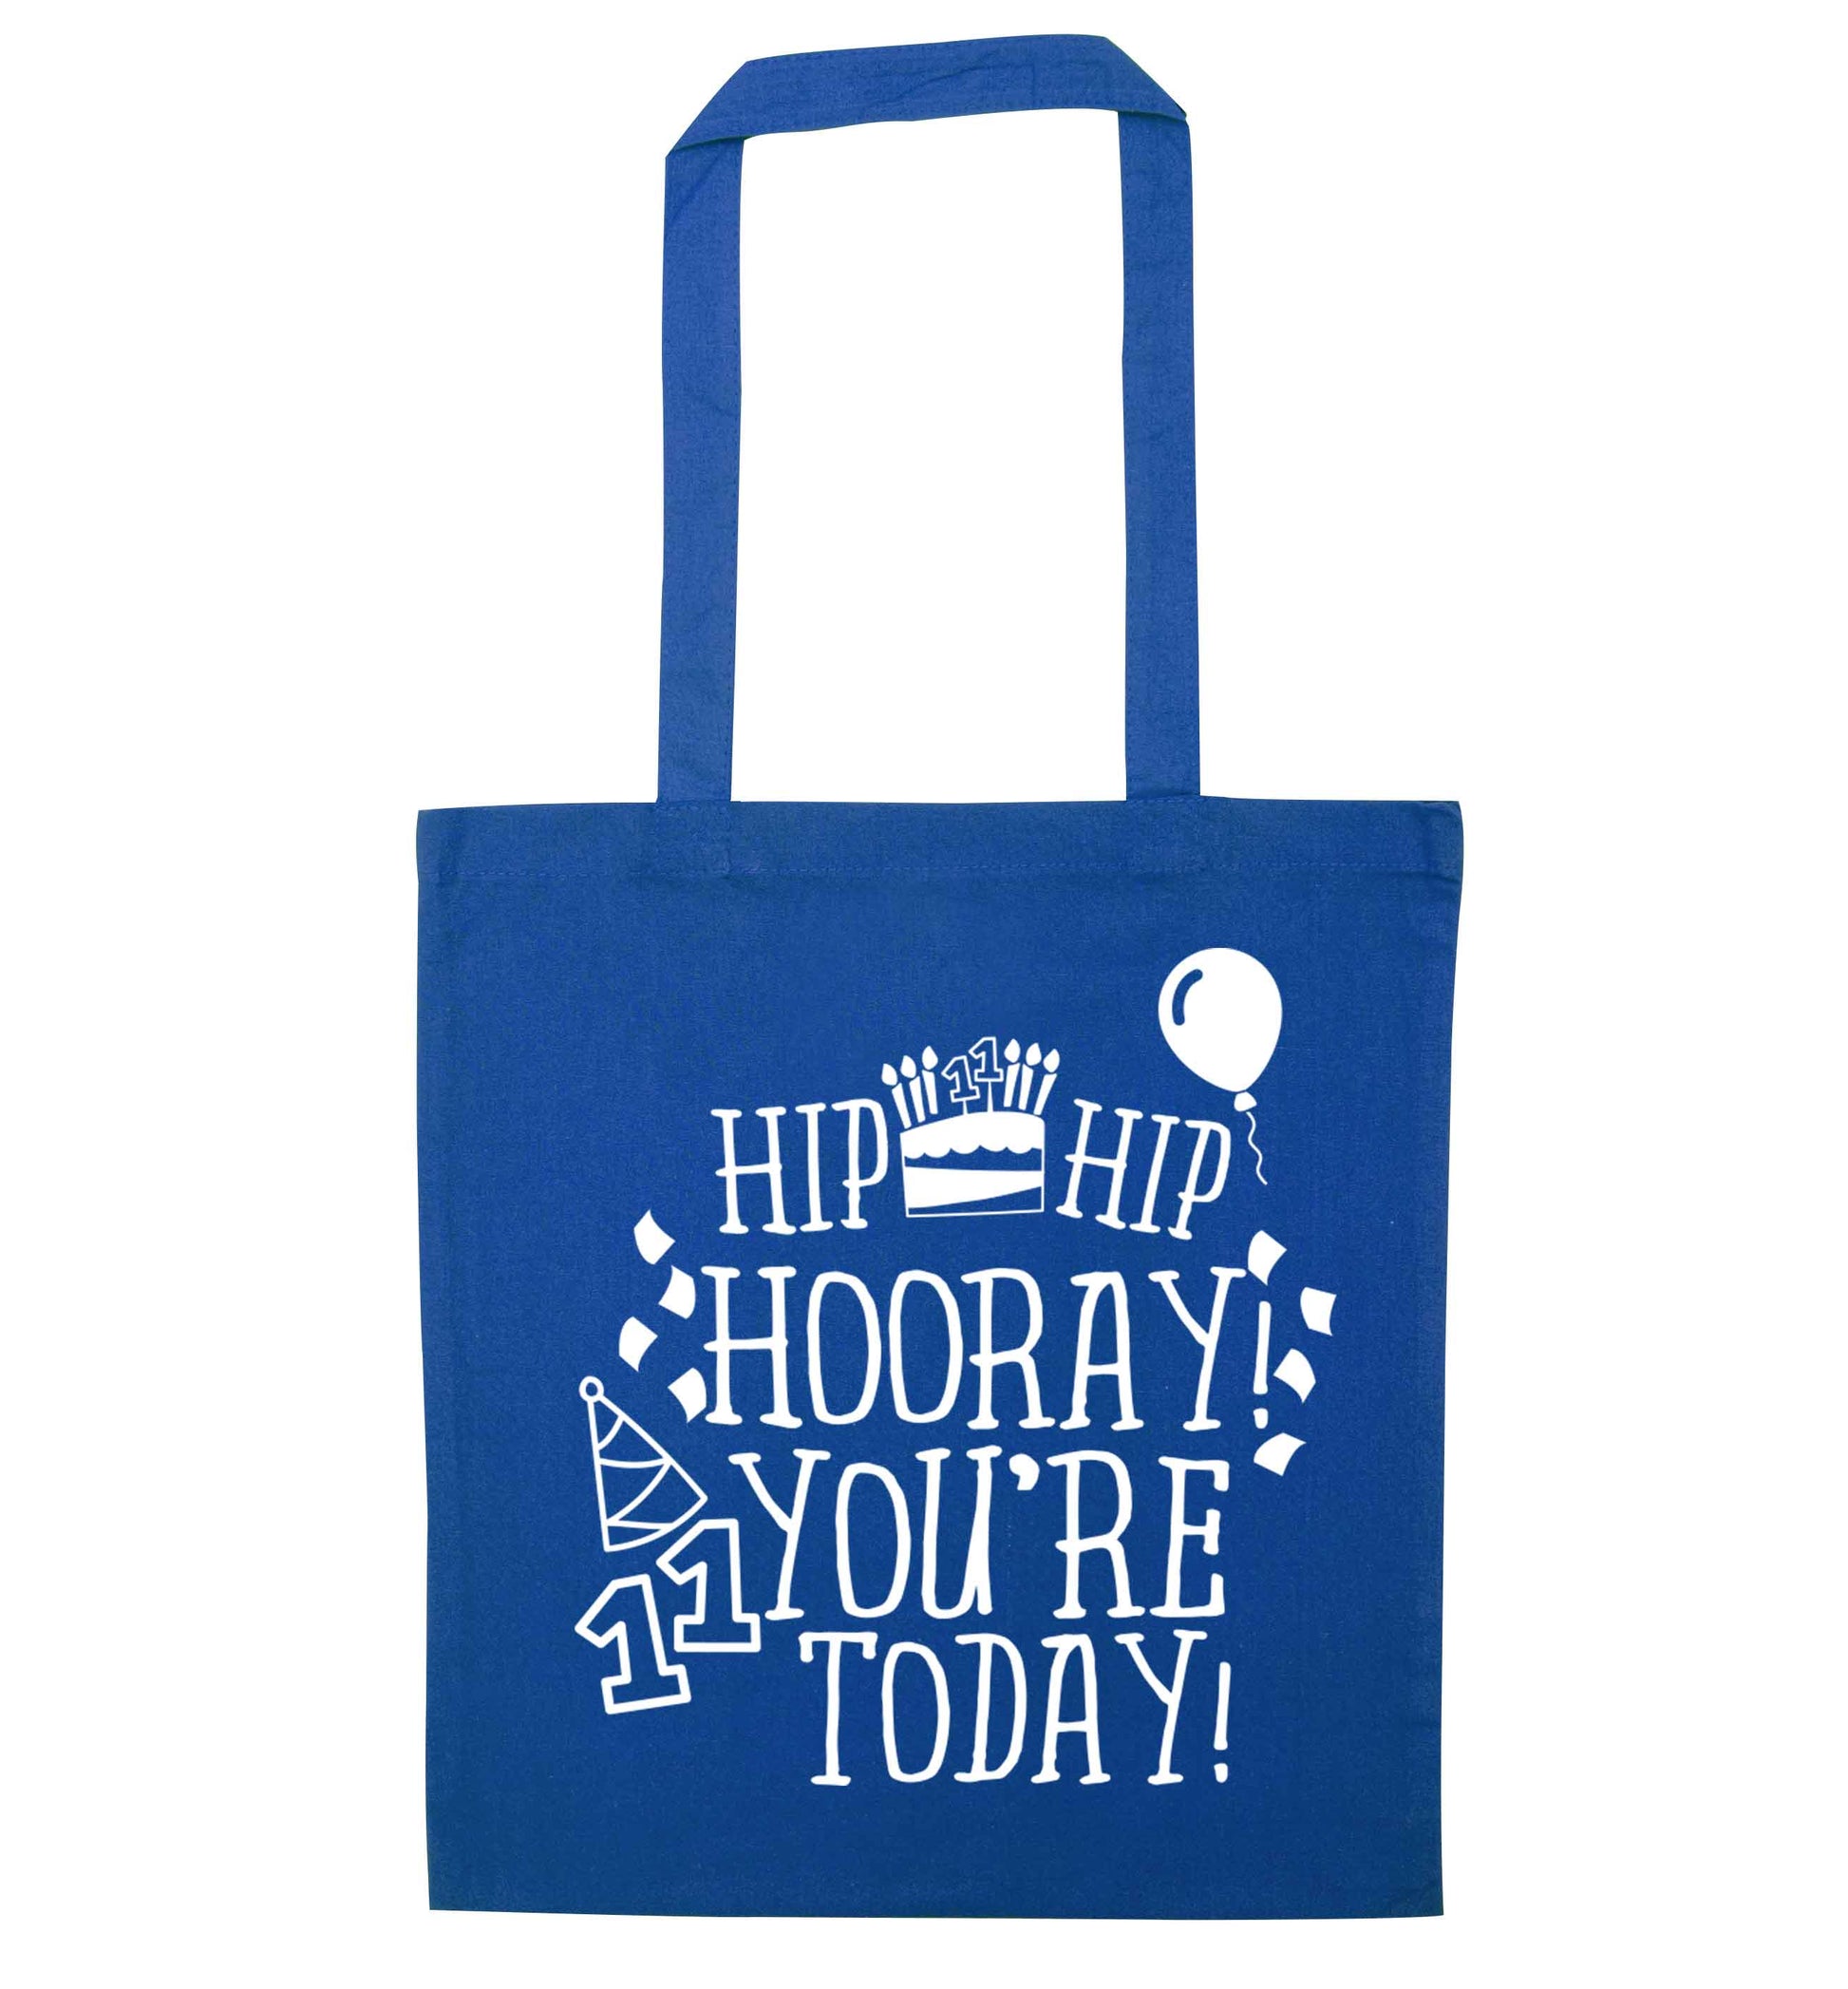 Hip hip hooray I you're eleven today! blue tote bag